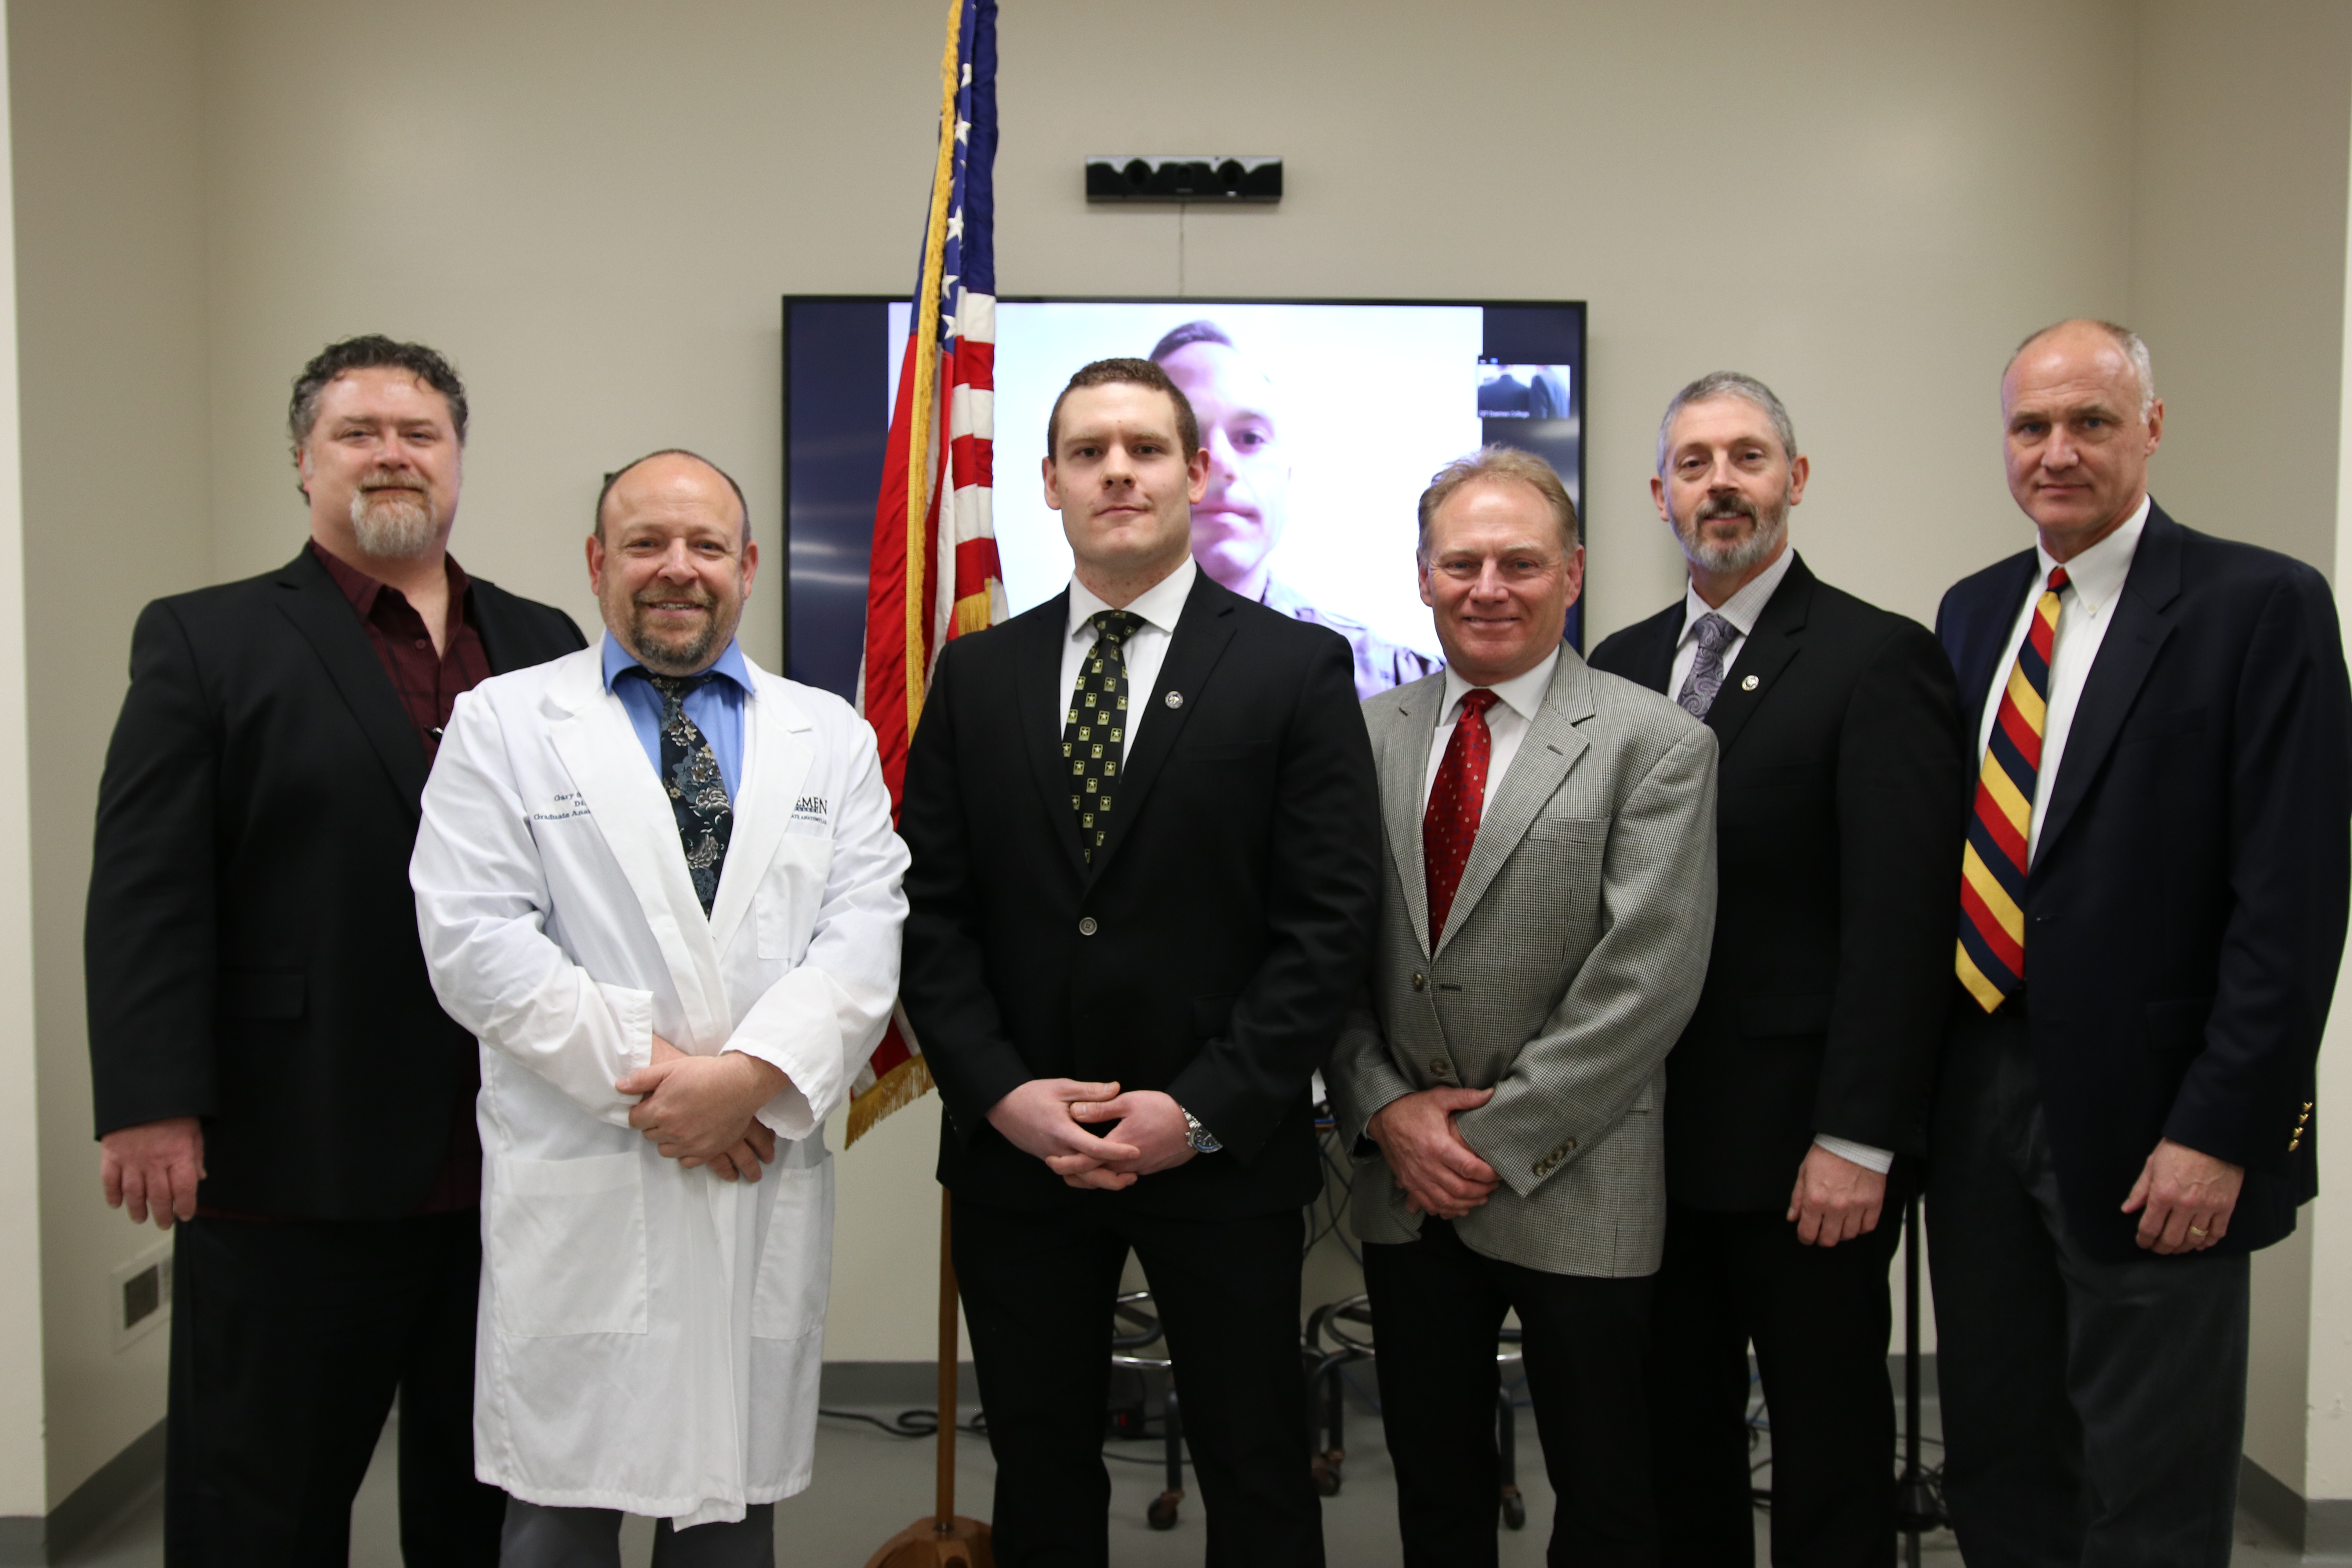 (L-R) Dr. Michael Ross, assistant professor of physical therapy; Dr. Gary Styn, director of graduate anatomical sciences and clinical assistant professor; Dr. Sean Christie; Dr. Ron Schenk, professor of physical therapy; Dr. Greg Ford, chair of physical therapy; and Dr. Karl Terryberry, professor of physical therapy.